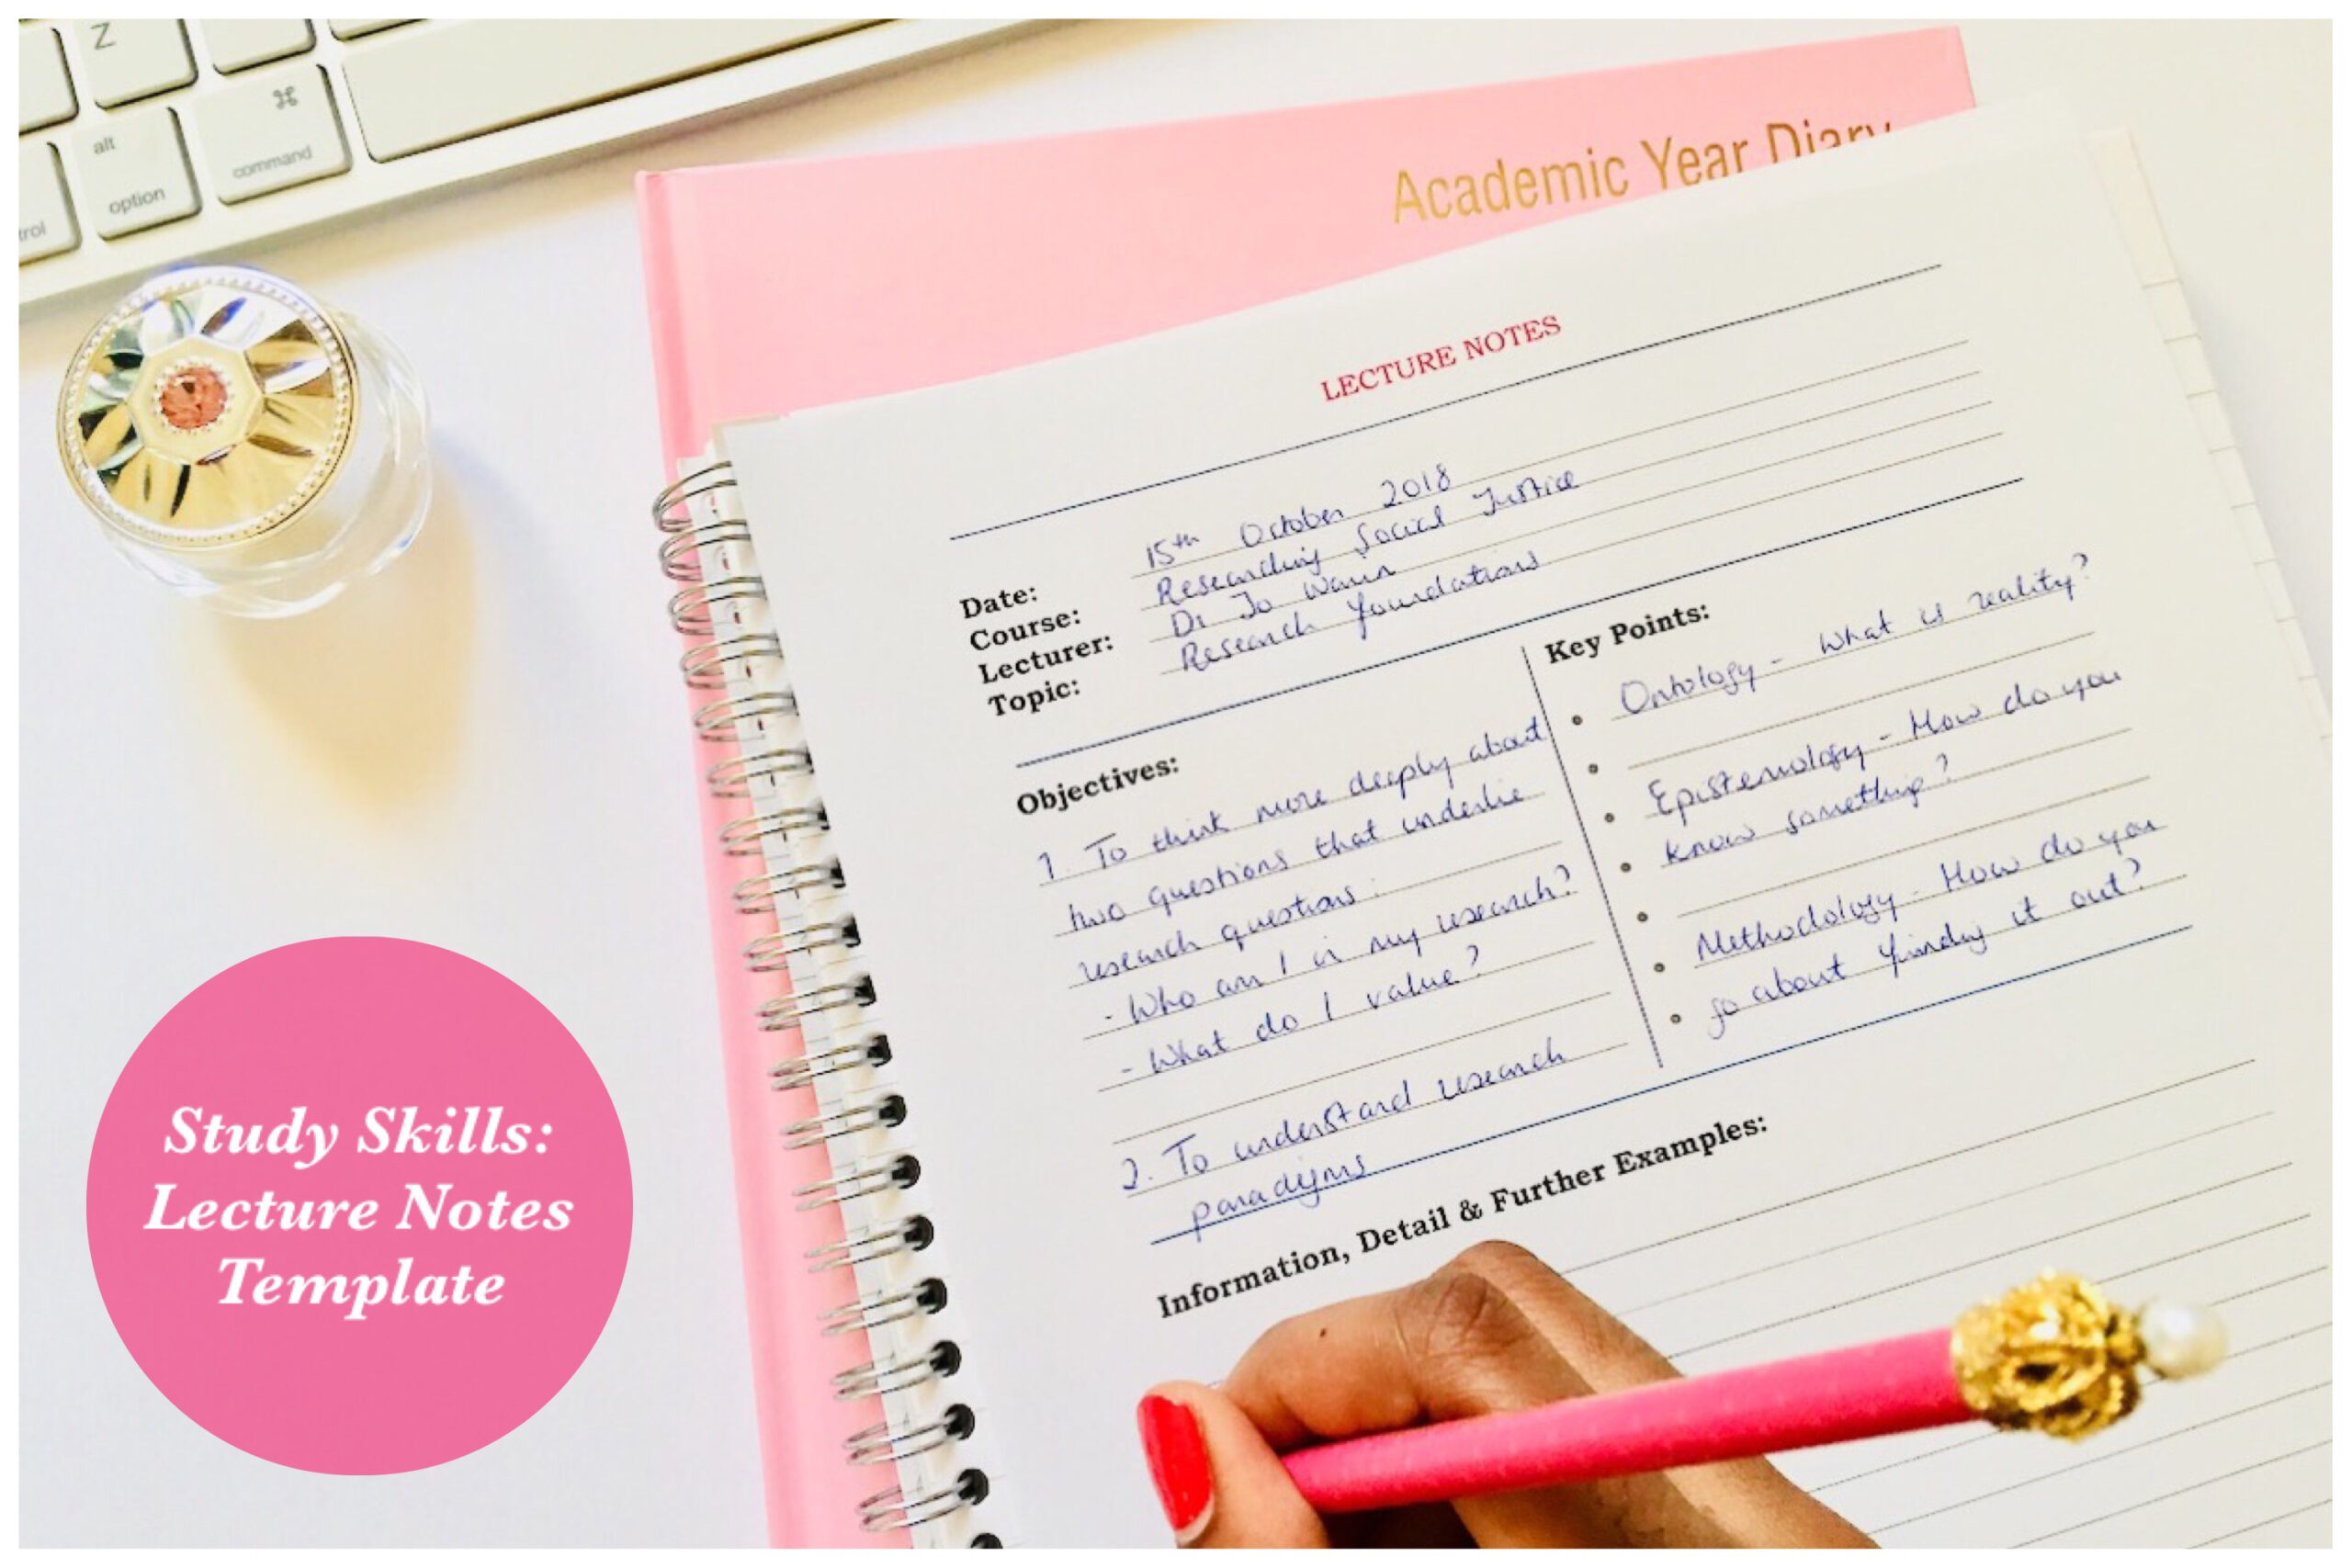 Lecture Notes Template (Free Download) | Learn With Nafisa Throughout Lecture Note Template